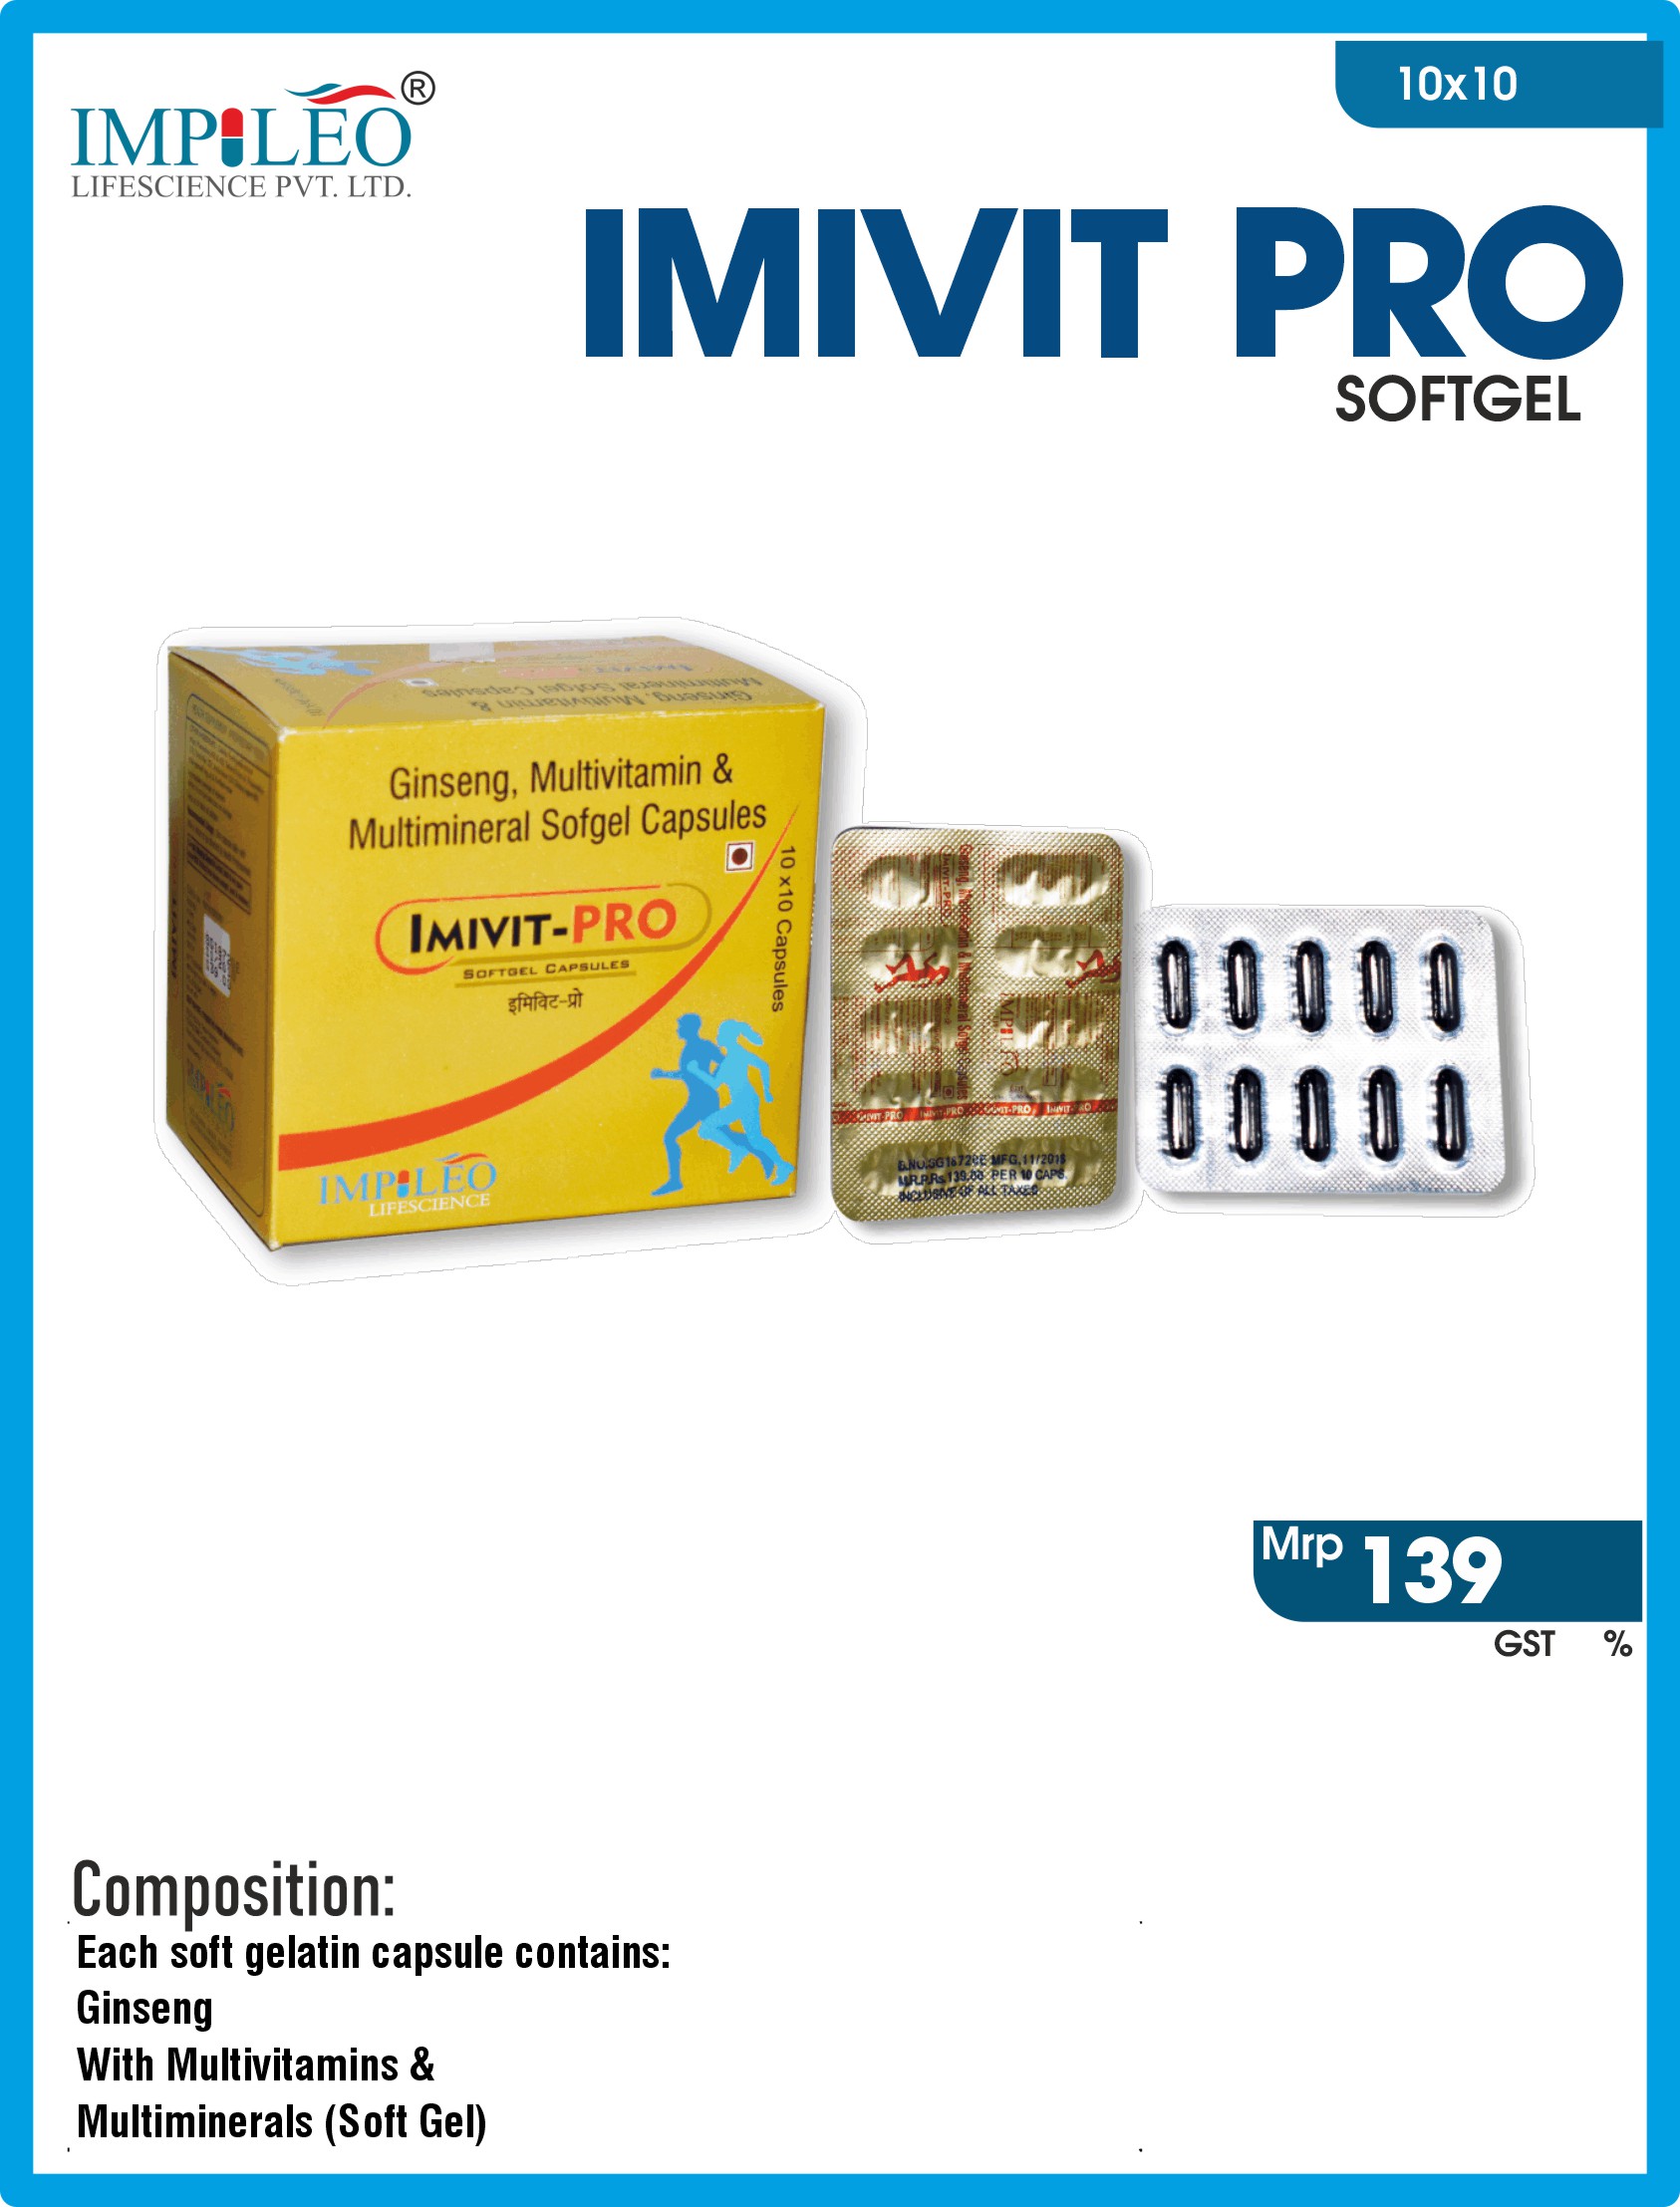 IMIVIT-PRO (Ginseng with Multivitamin and Multi mineral) softgel capsules From PCD Pharma Franchise in India